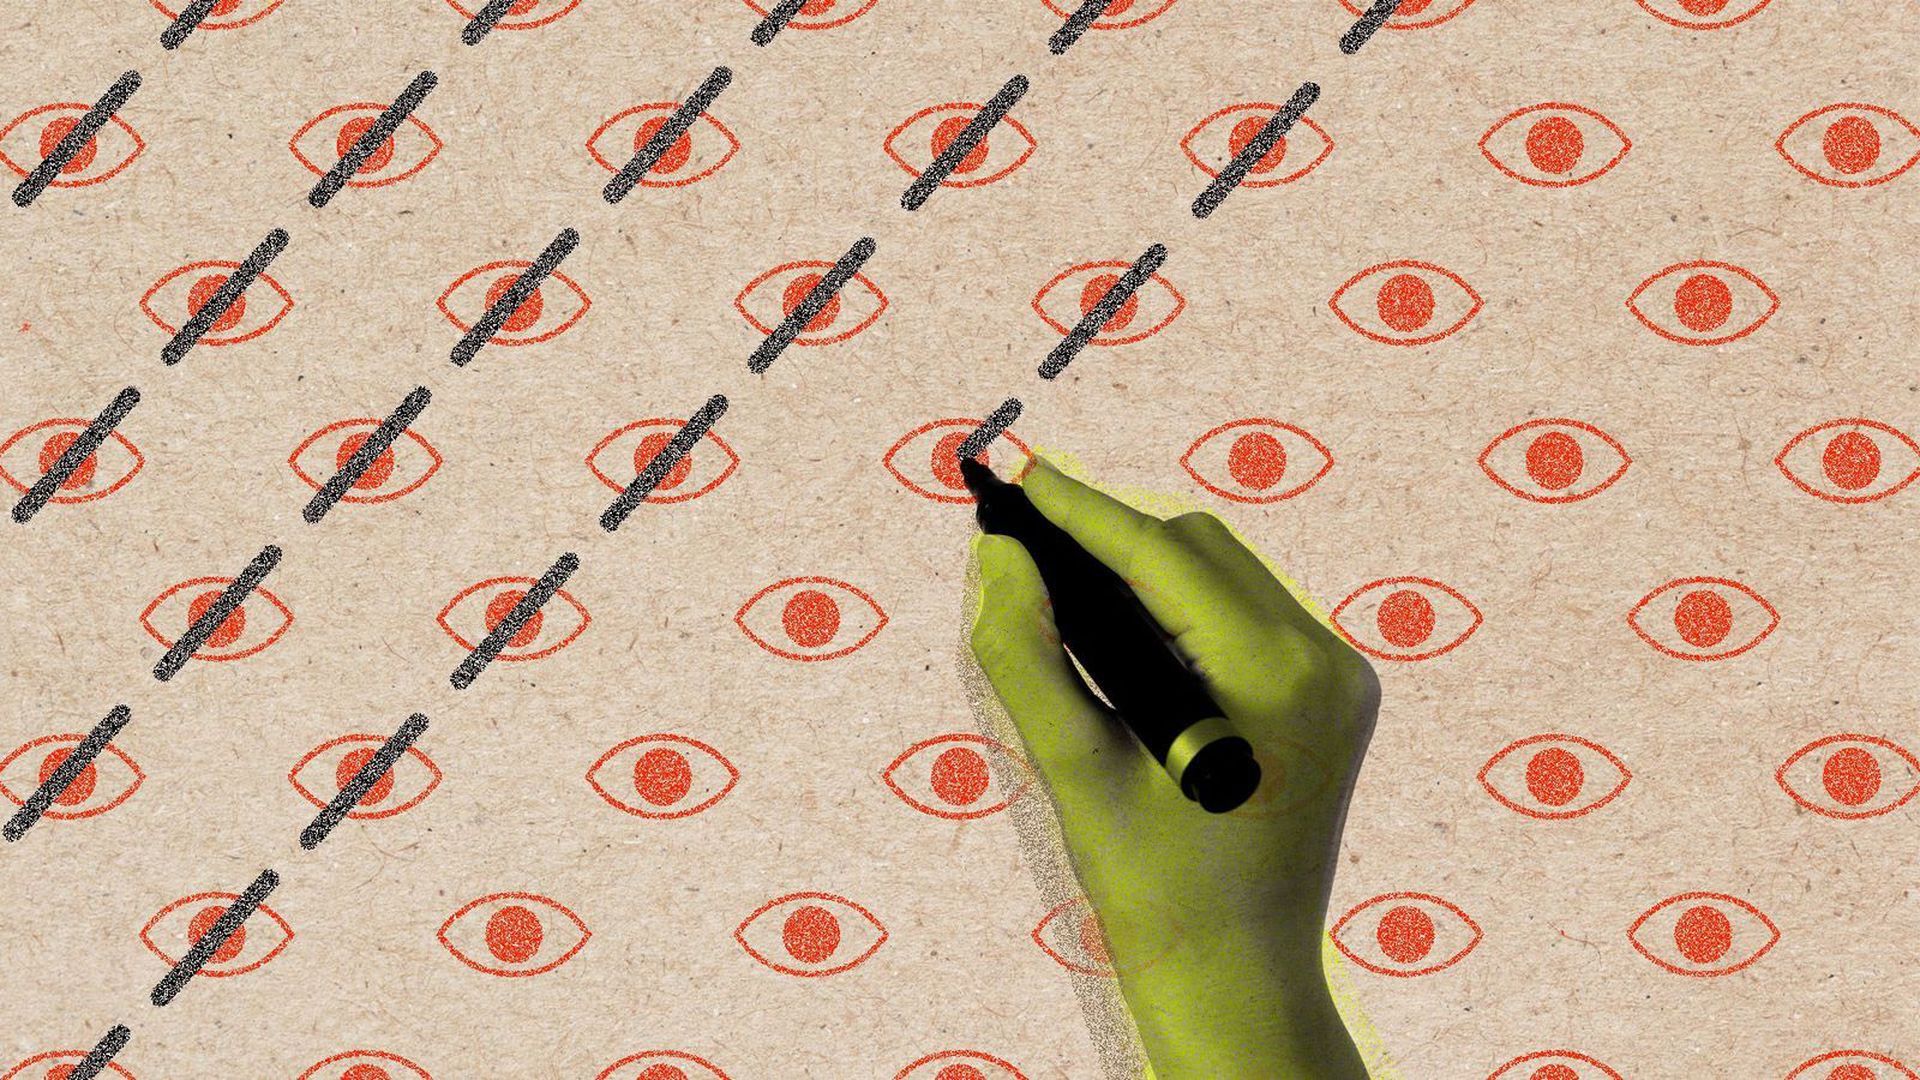 Illustration of a hand with pen crossing out eyes in a pattern